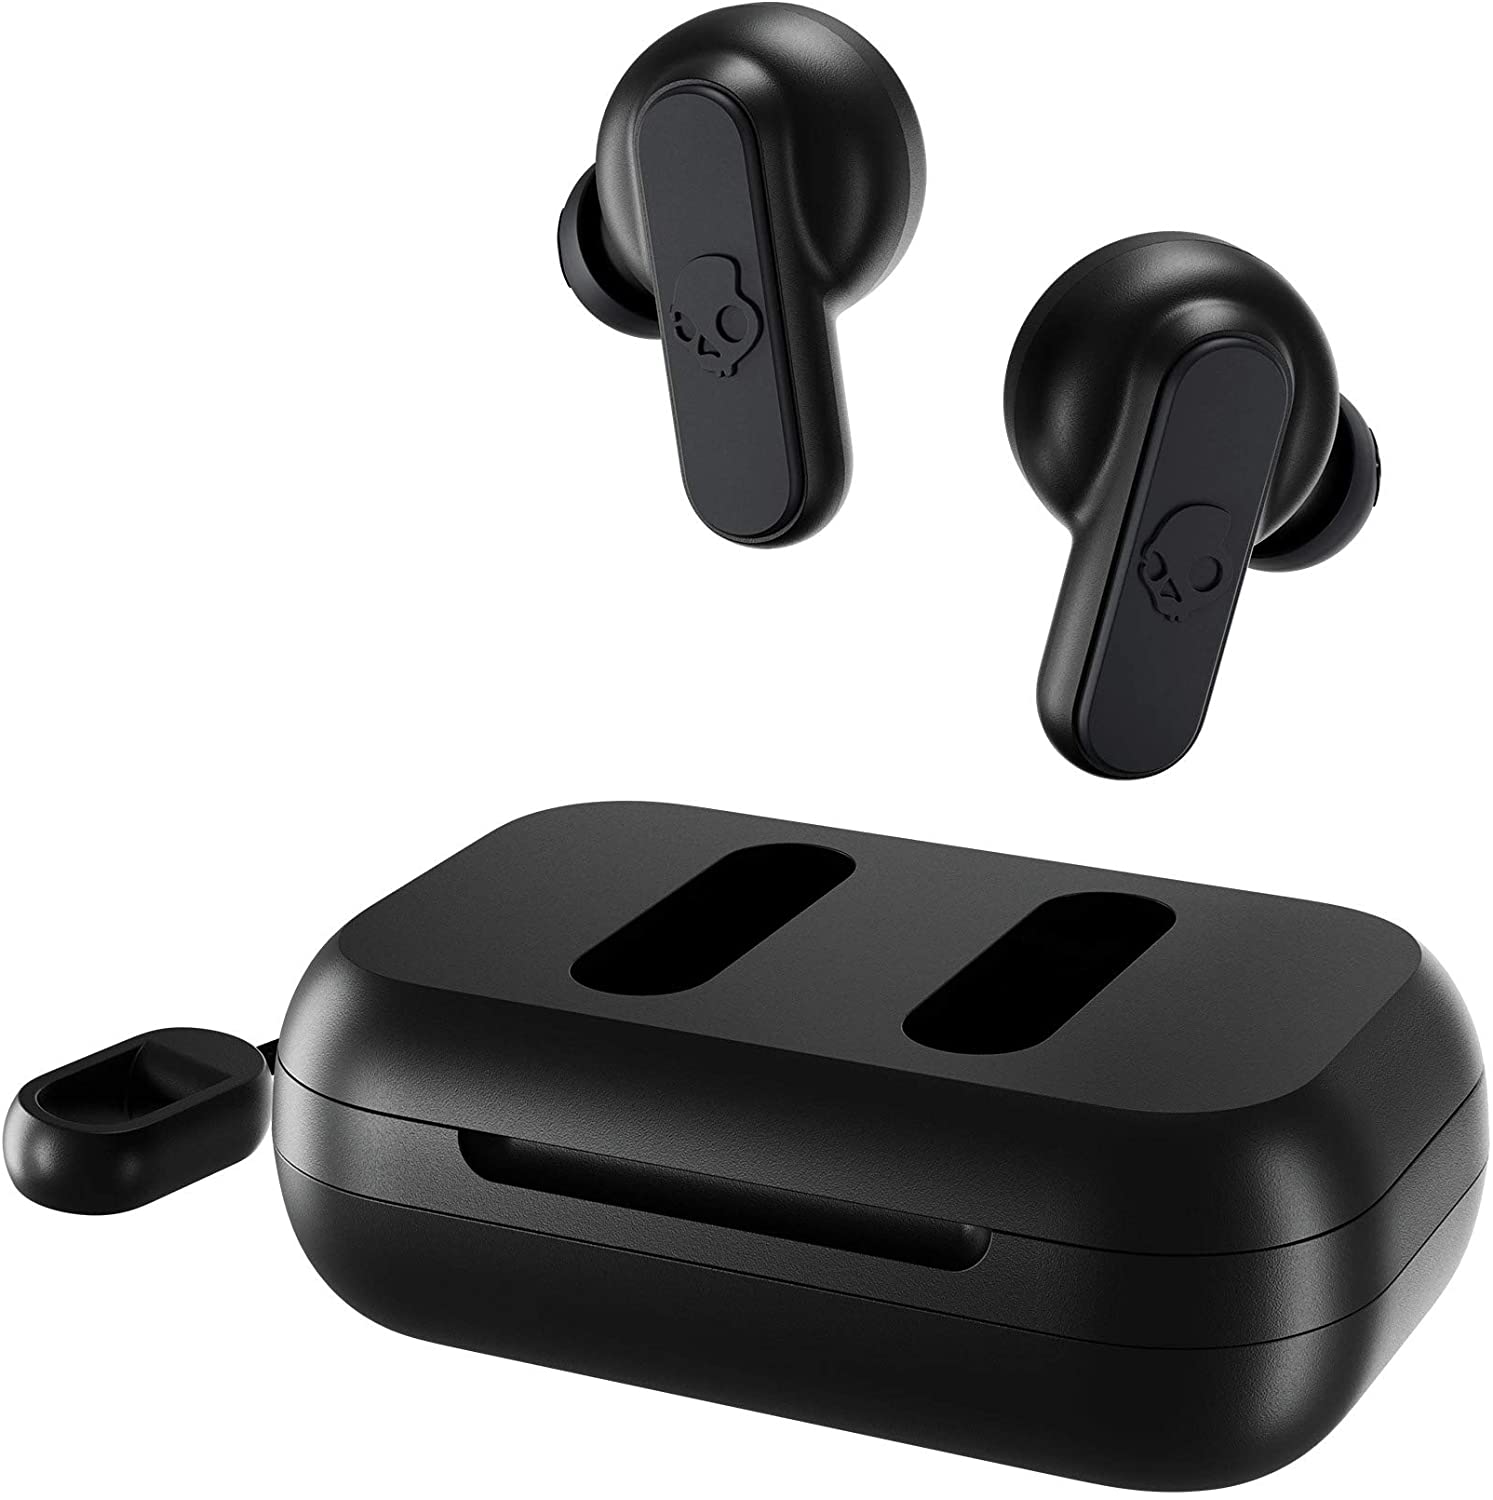 Simple Steps To Reset Skullcandy Wireless Earbuds